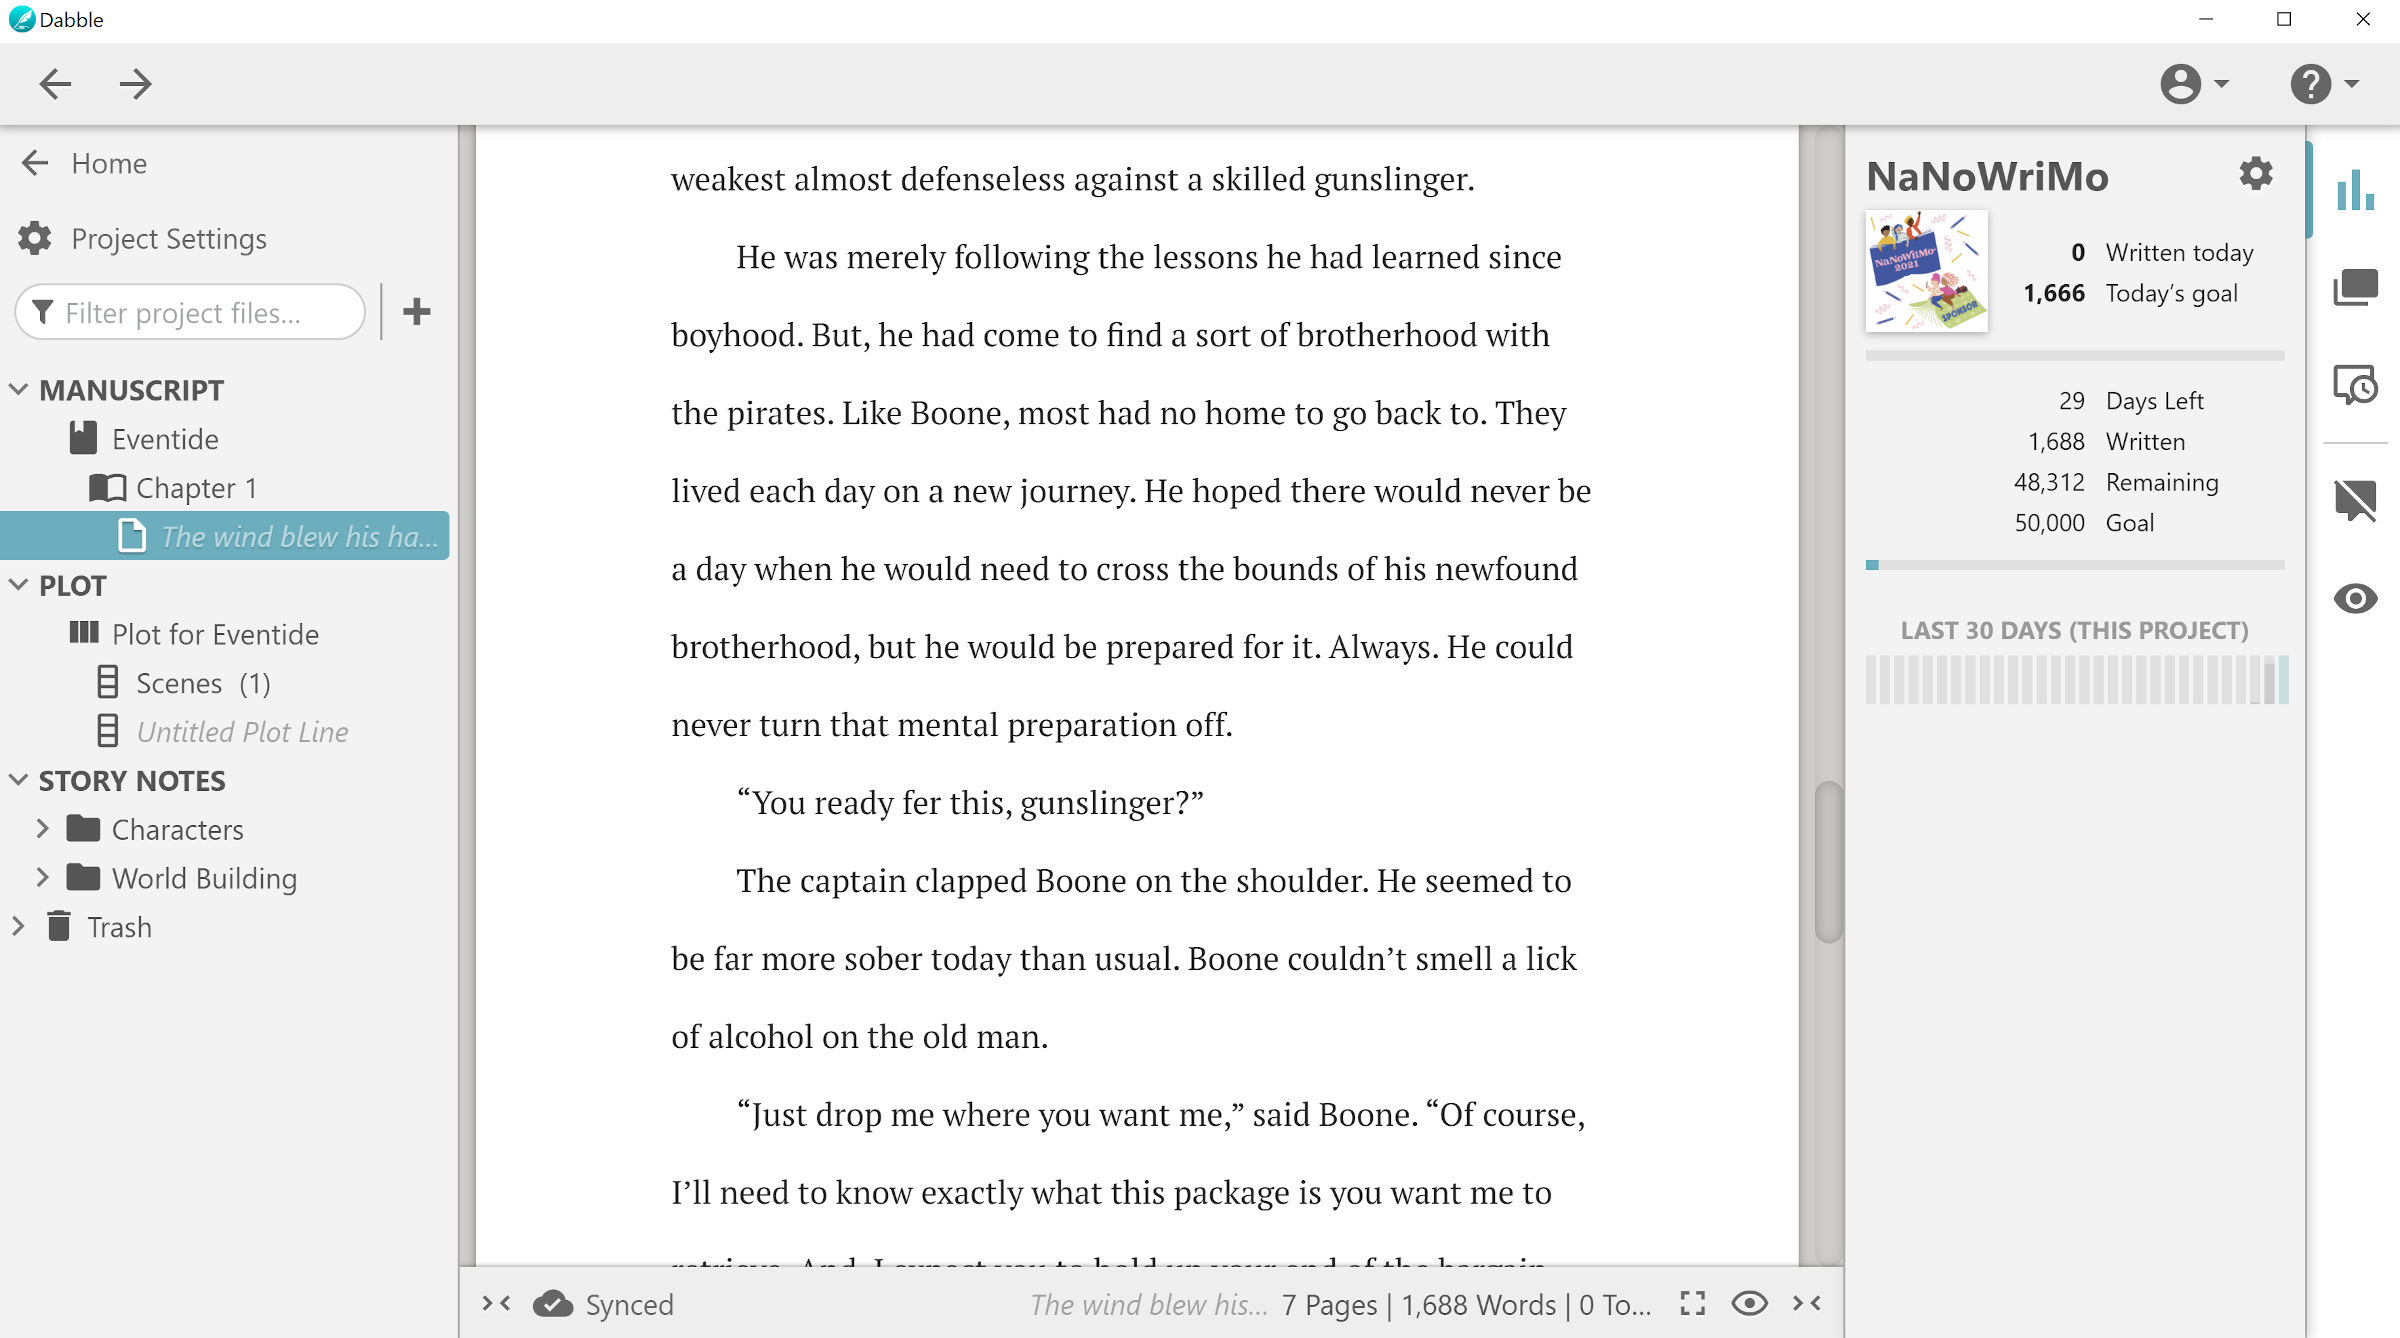 Screenshot of the Dabble writing software. Content areas shows words written on the screen.